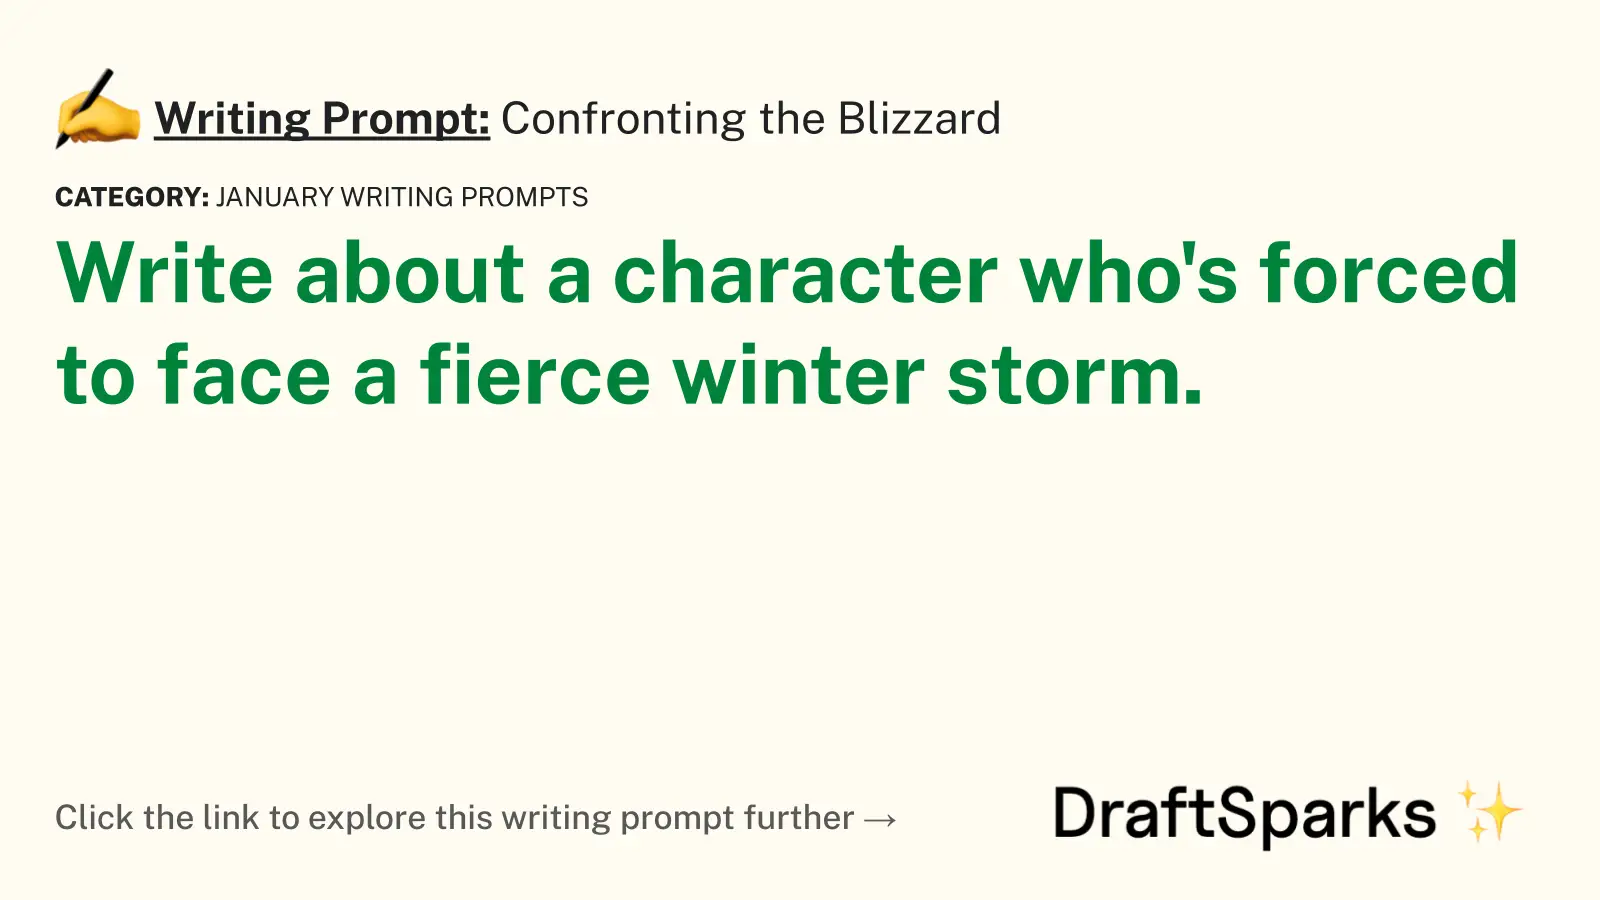 Confronting the Blizzard